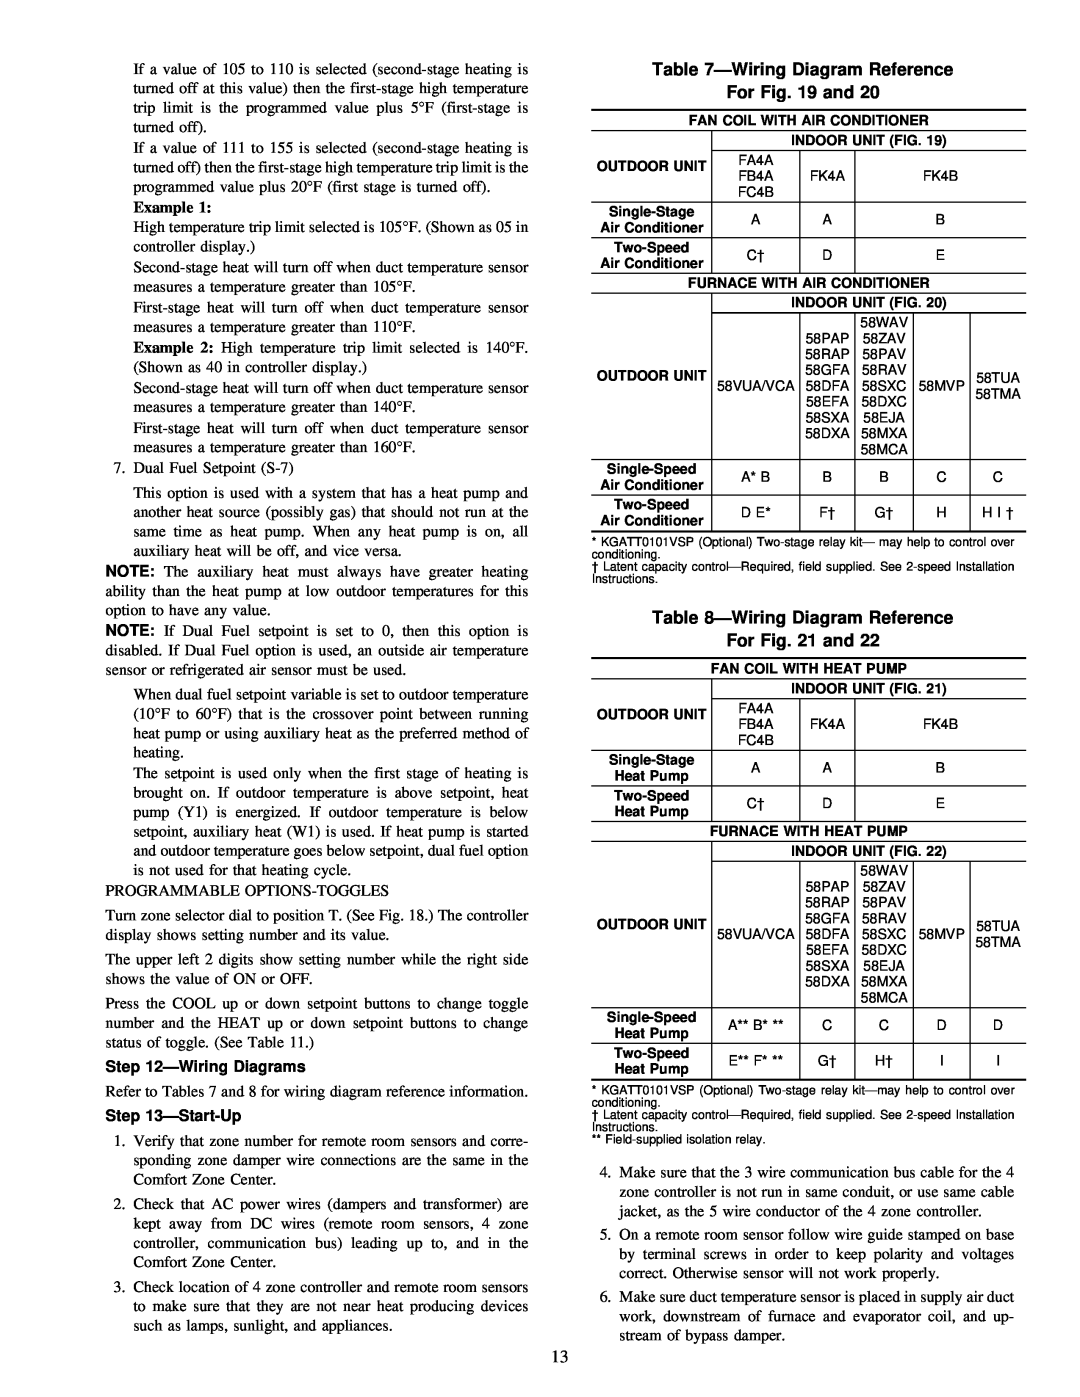 Carrier ZONEKIT4ZCAR instruction manual ÐWiring Diagram Reference For and, ÐWiring Diagrams, ÐStart-Up 